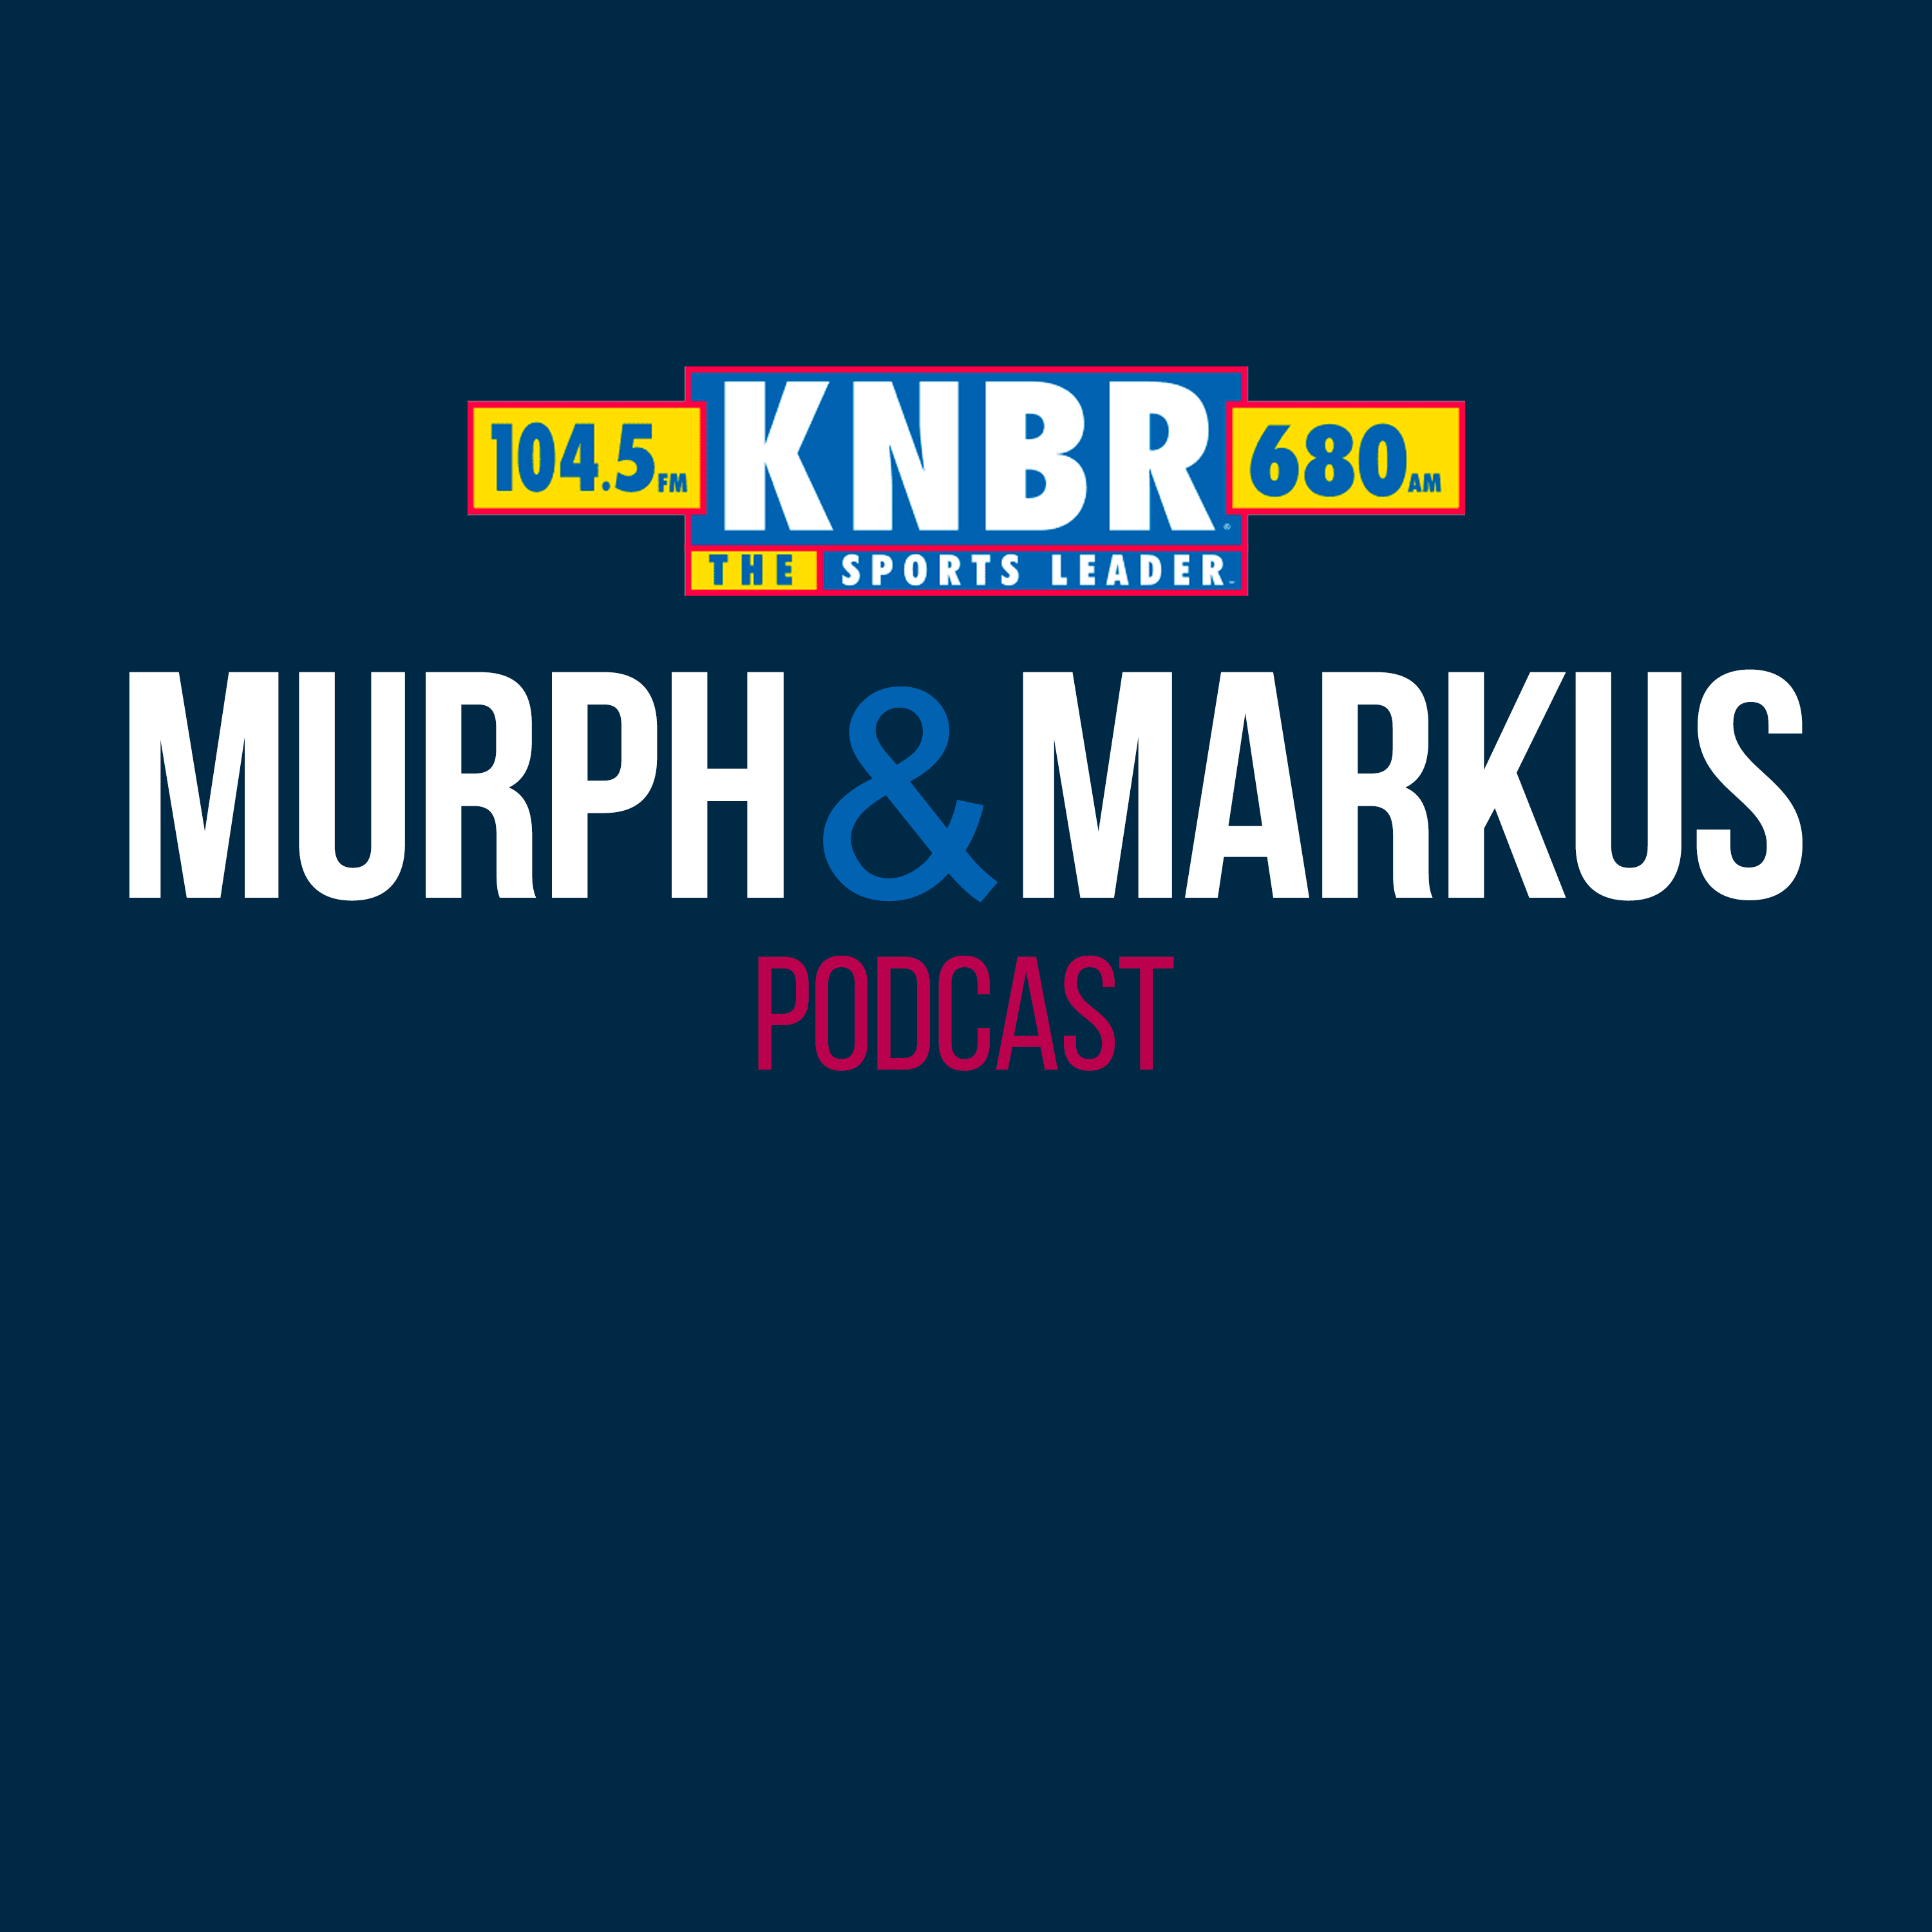 4-10 Hour 1: Murph & Markus react to the Giants losing to the Nationals yet again, share their thoughts on Draymond's big night in LA, and give their perspective on Kyle Harrison's outing last night